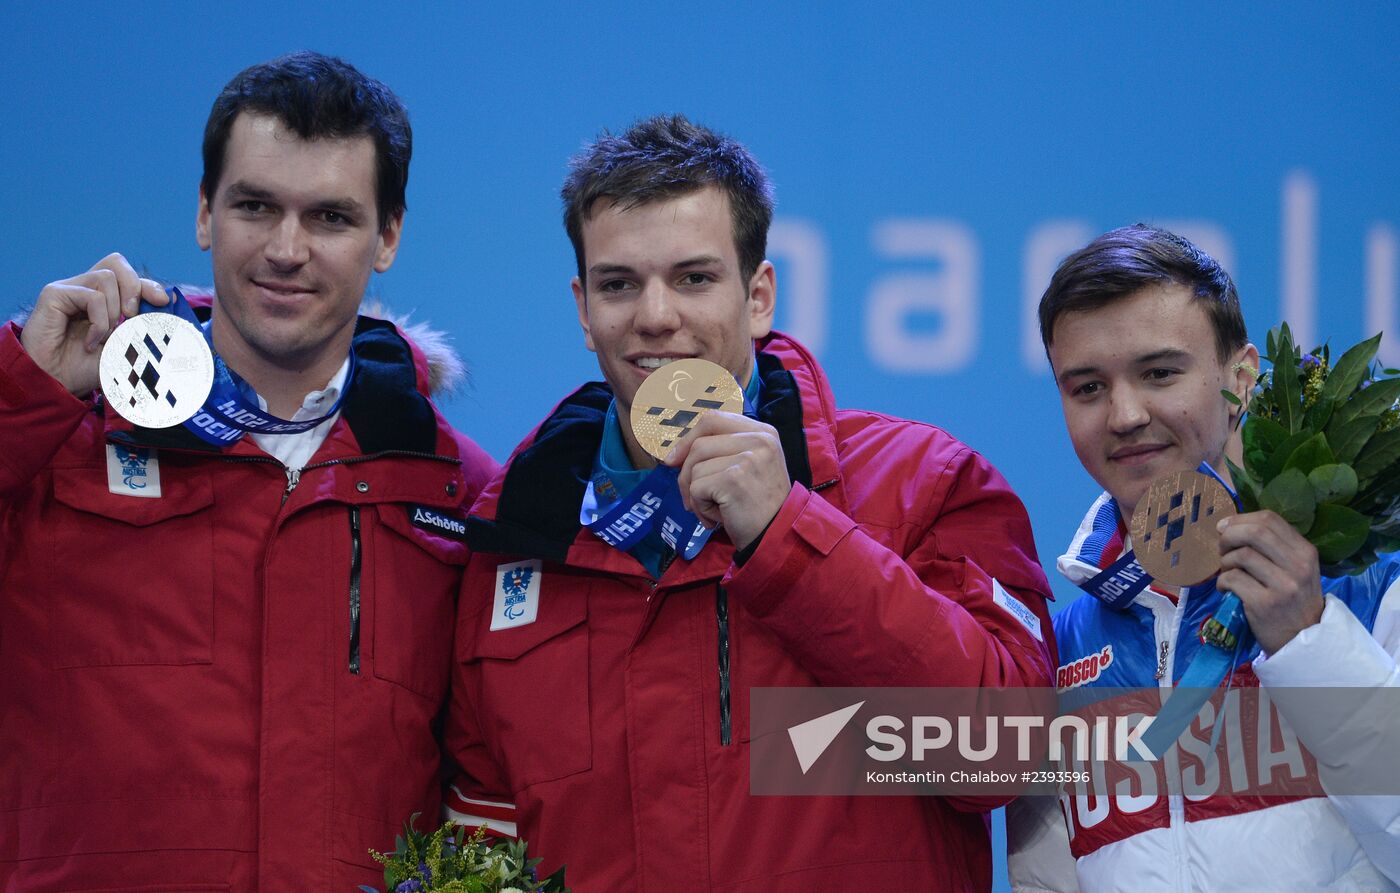 2014 Winter Paralympics. Medal ceremony. Day Two